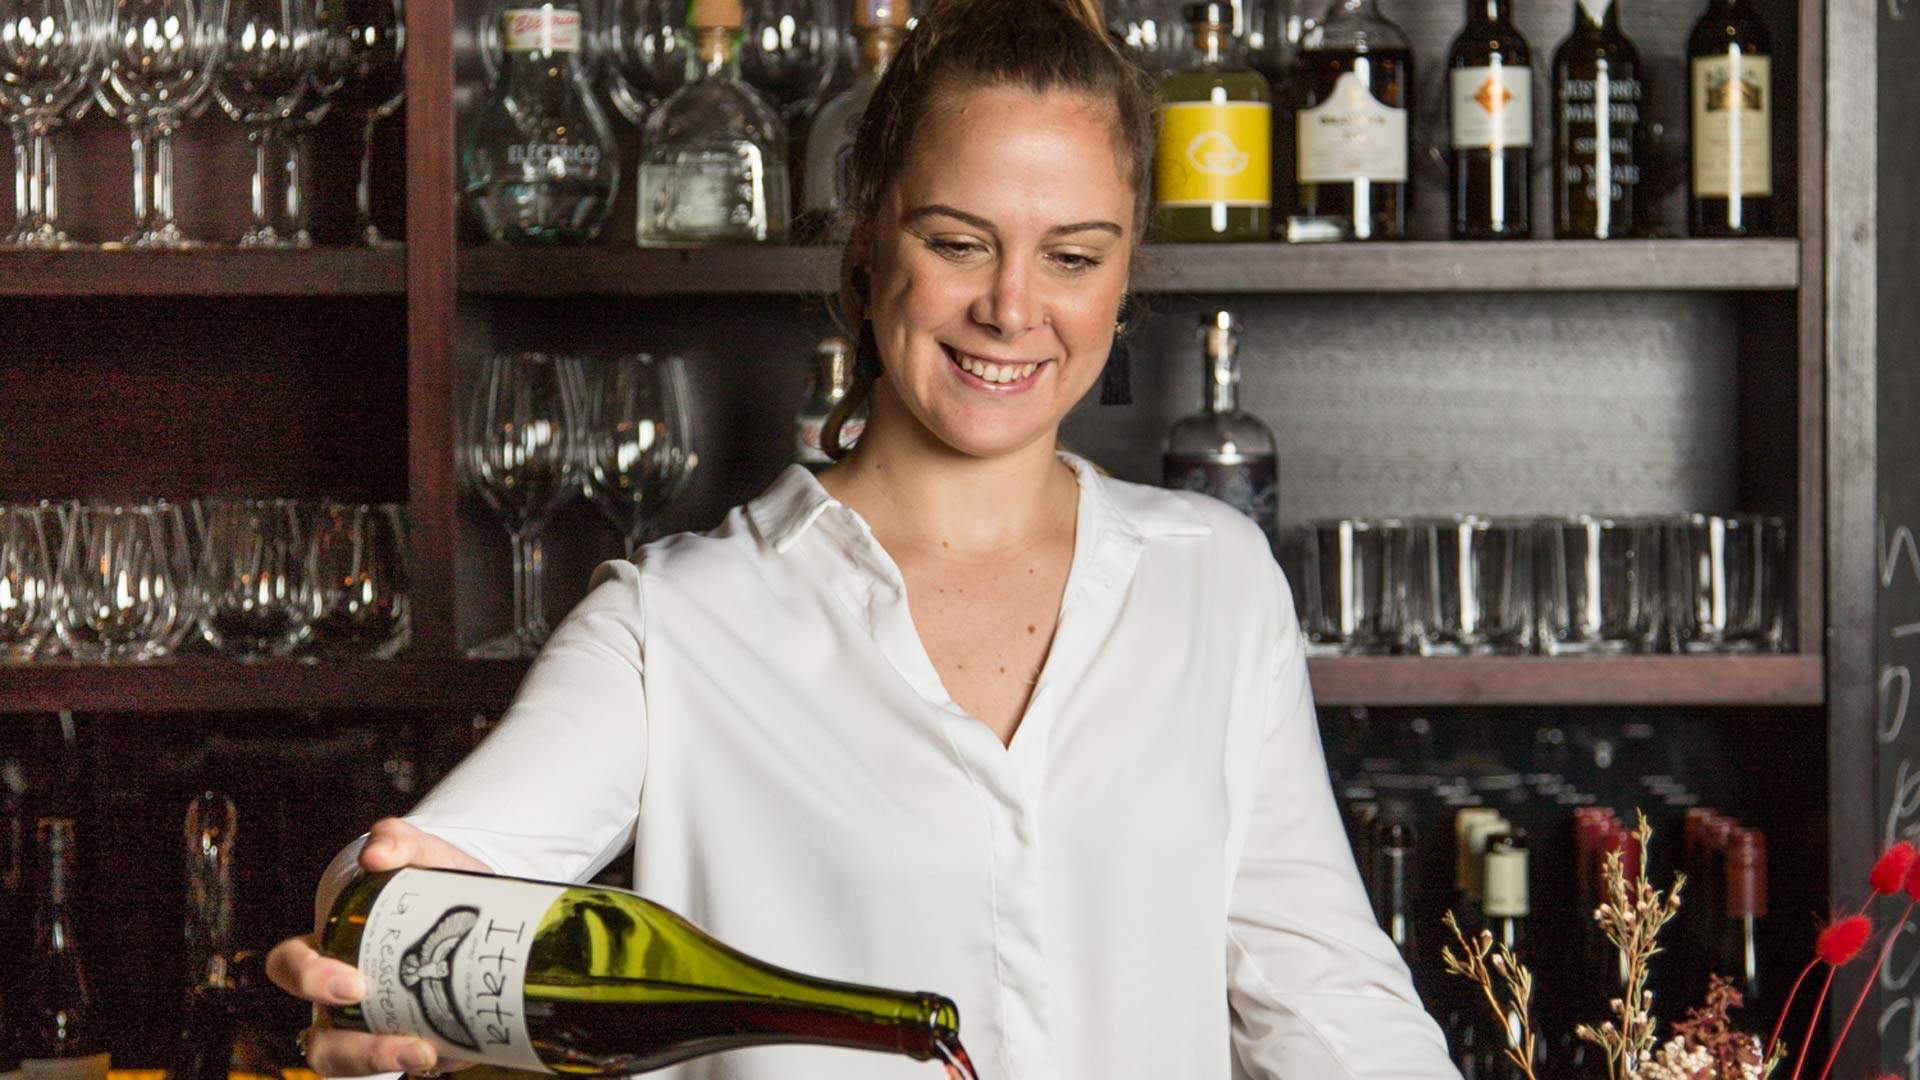 Bibo's Head Sommelier Is Zooming Customers to Reconnect and Recreate the Wine Bar Experience